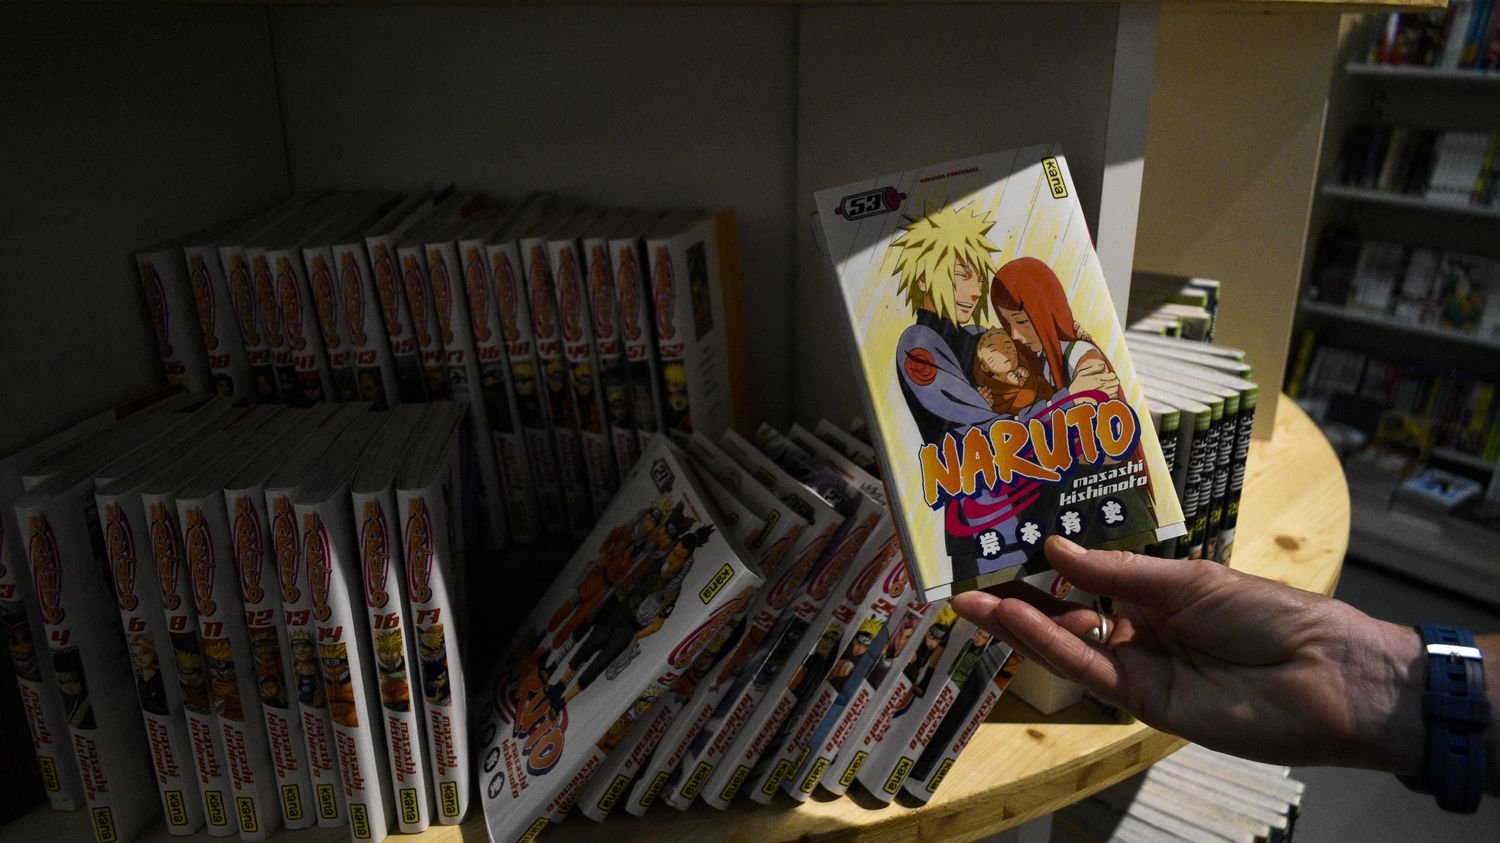 “Naruto”: the live-action film will be directed by Marvel director Destin Daniel Cretton